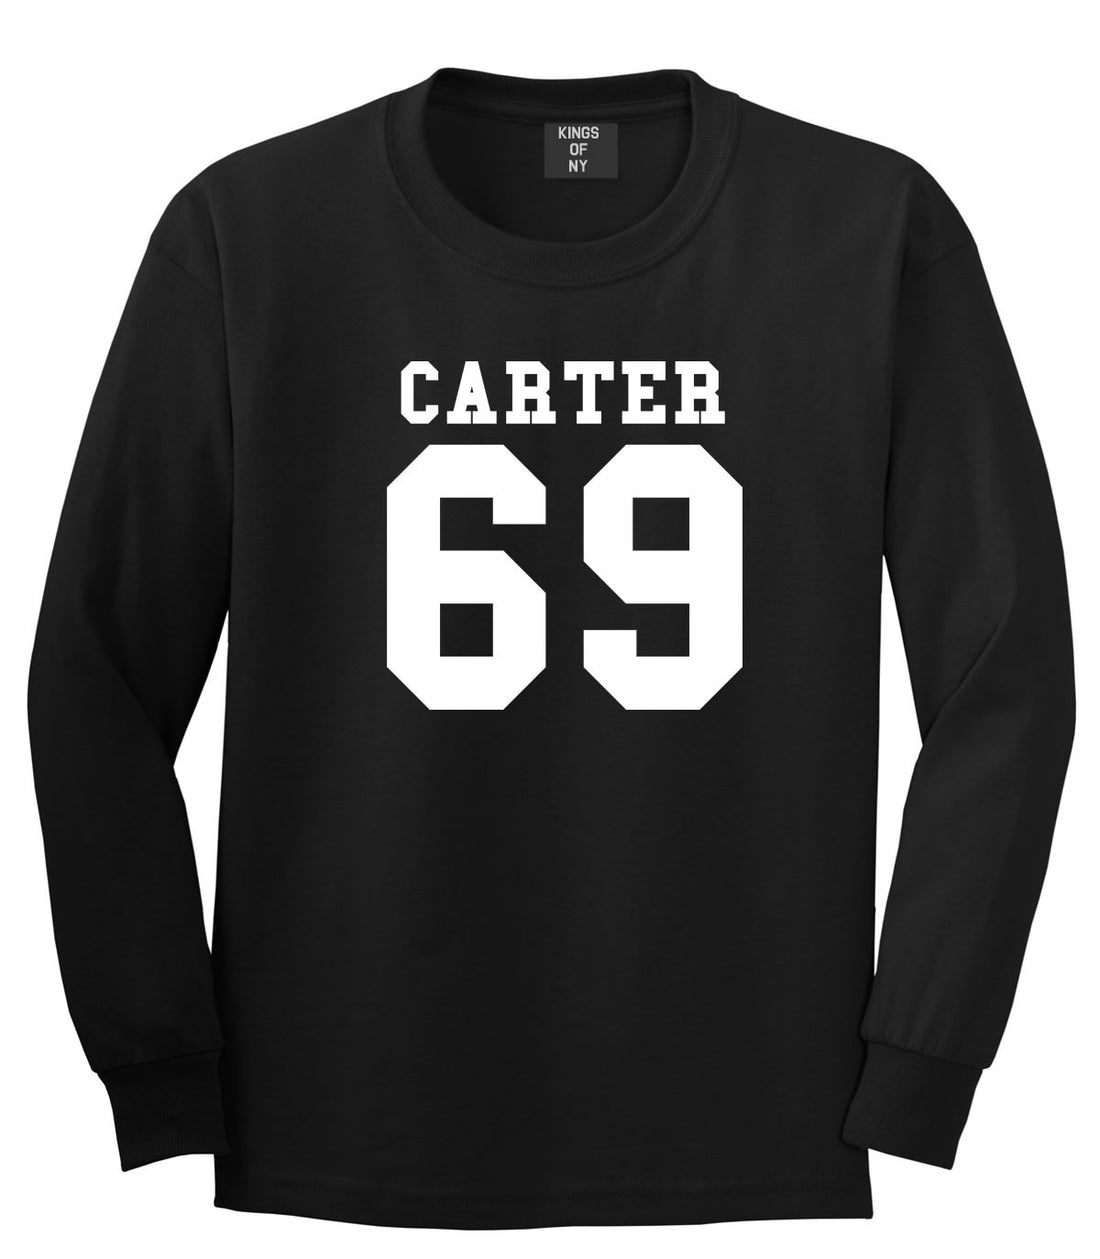  Carter 69 Team Long Sleeve T-Shirt in Black by Kings Of NY